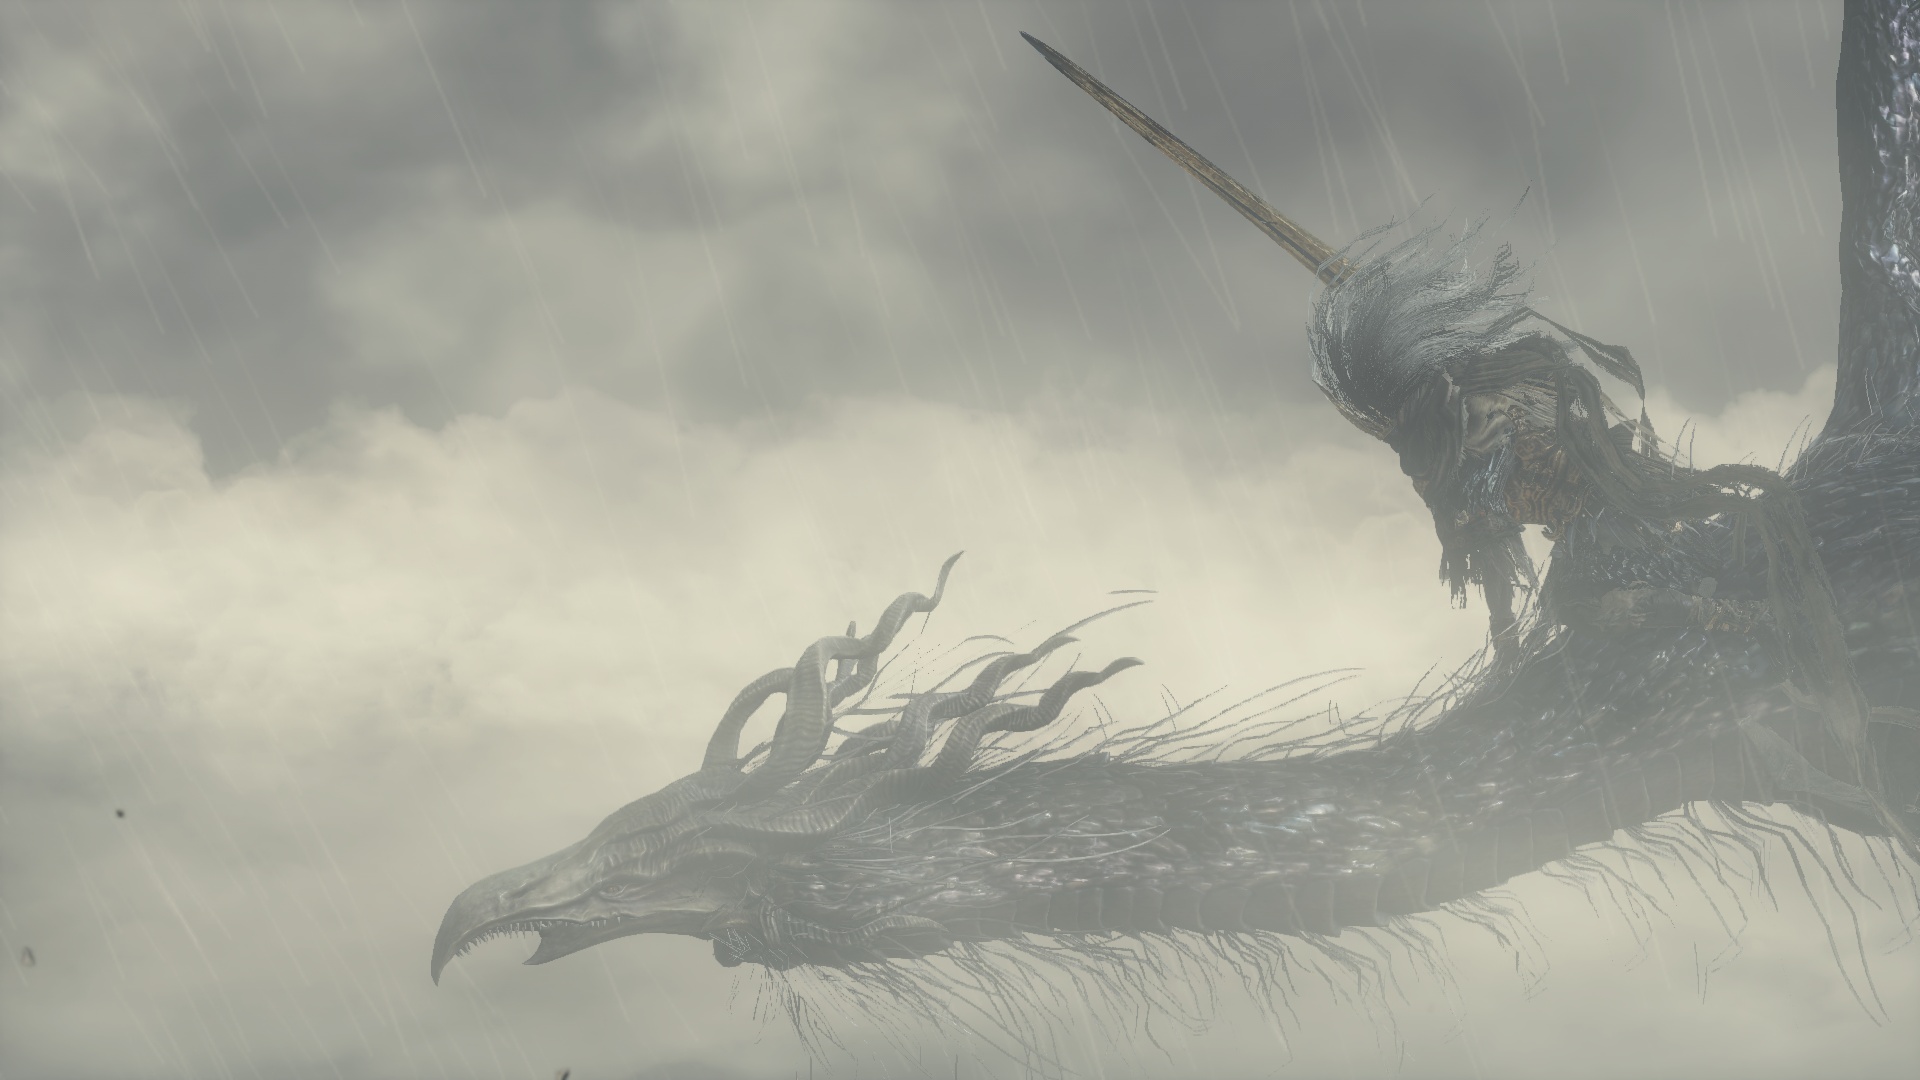 King of the Storm and Nameless King